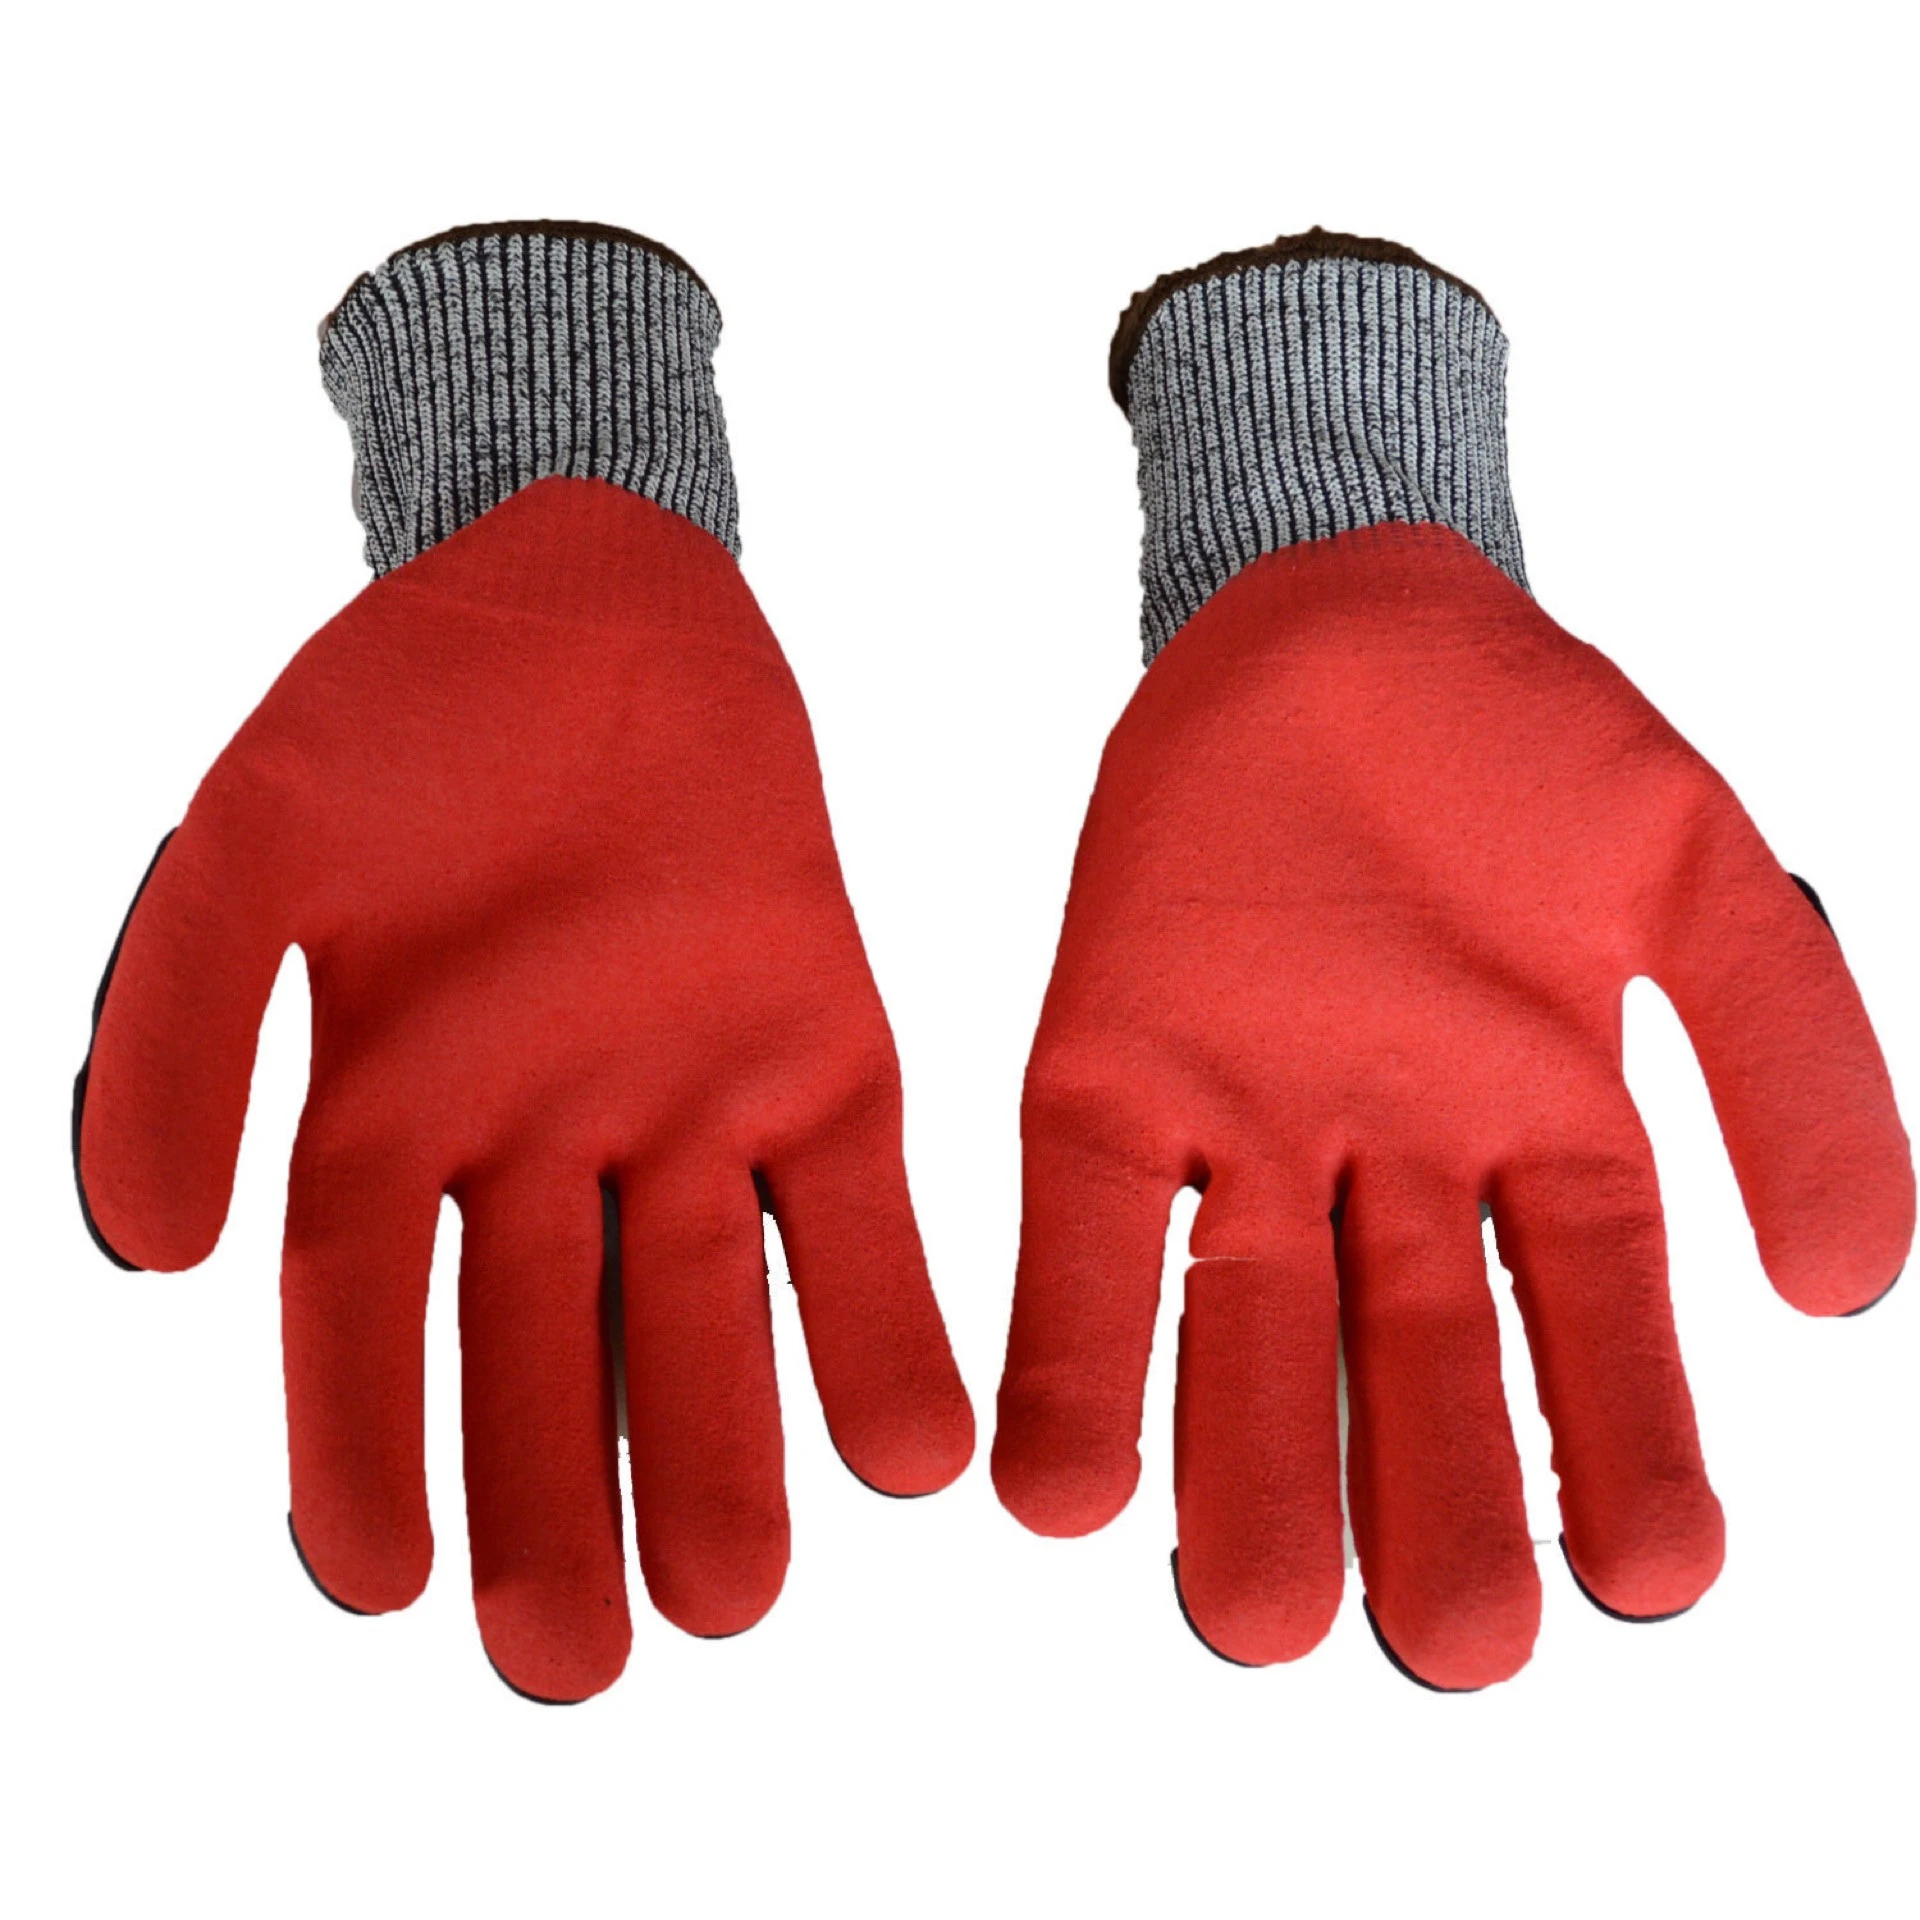 New Material Fiber Oven High Temperature Resistance Cheap Gloves